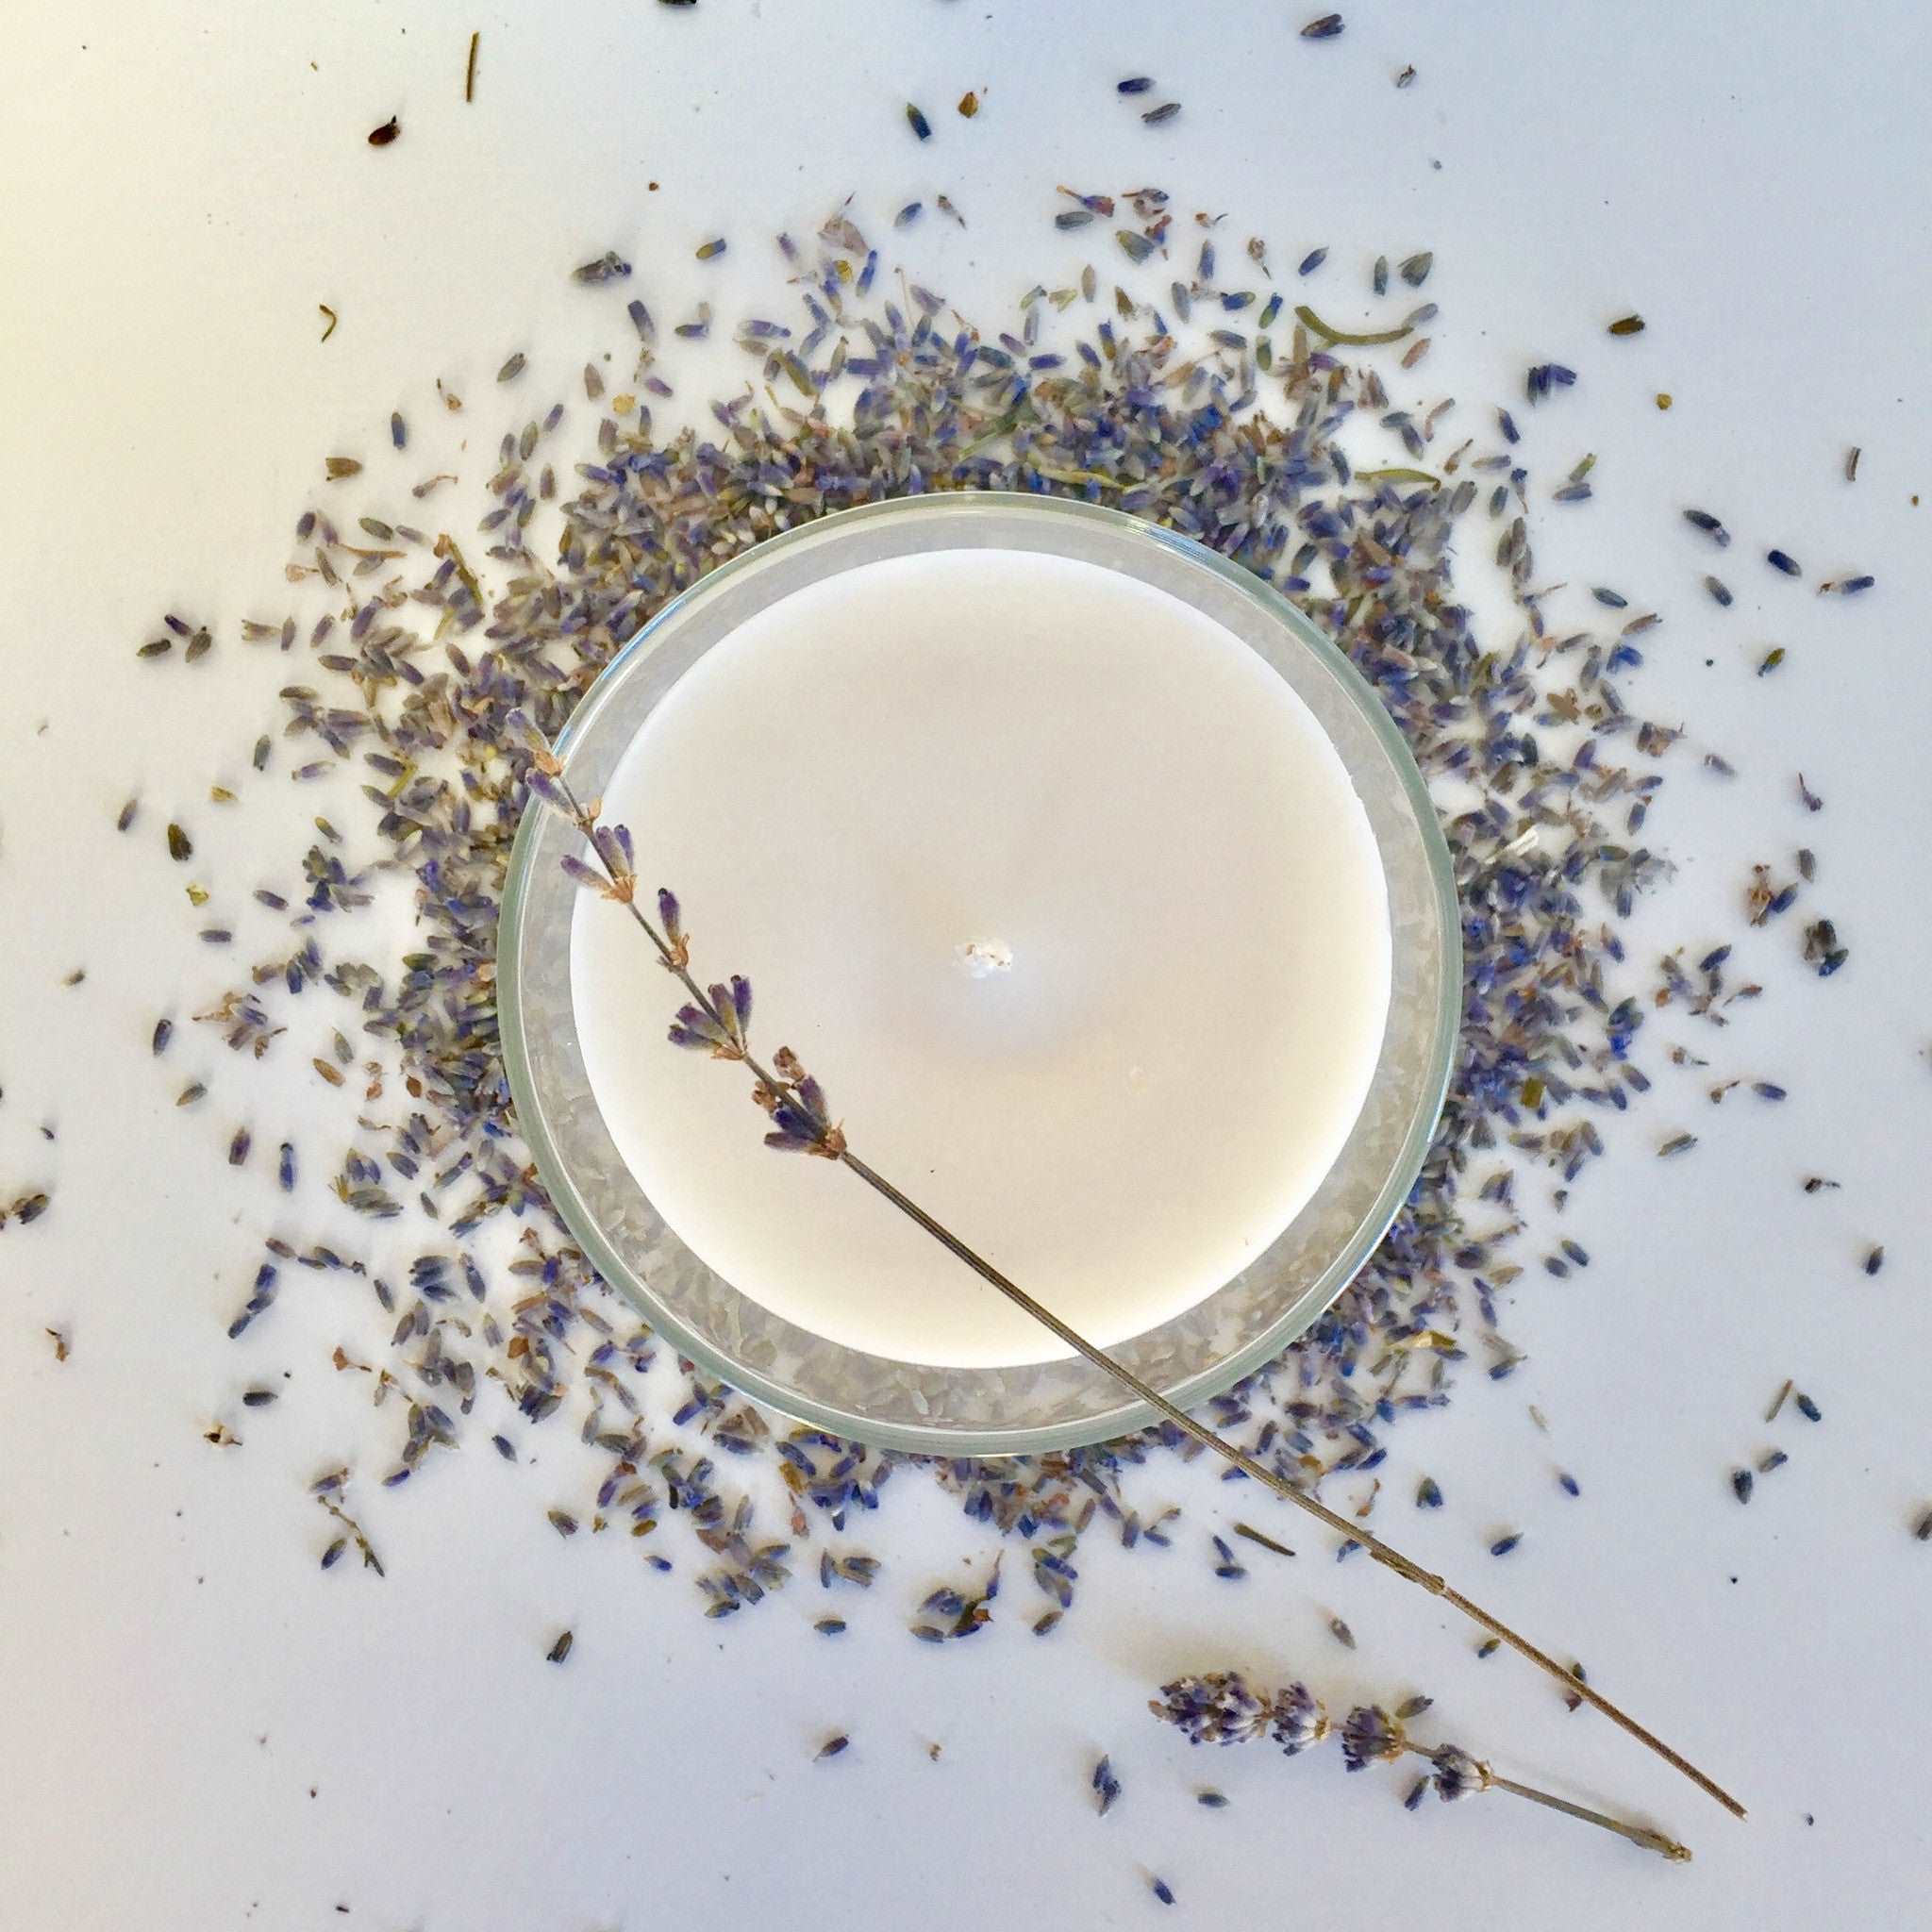 Lavender has a lovely herbal scent which helps promote relaxation. It is useful for treating anxiety, insomnia, depression, and restlessness.  This all natural soy candle will fill the room with the calming fragrance of Lavender!  Over 65 hours of burn time!